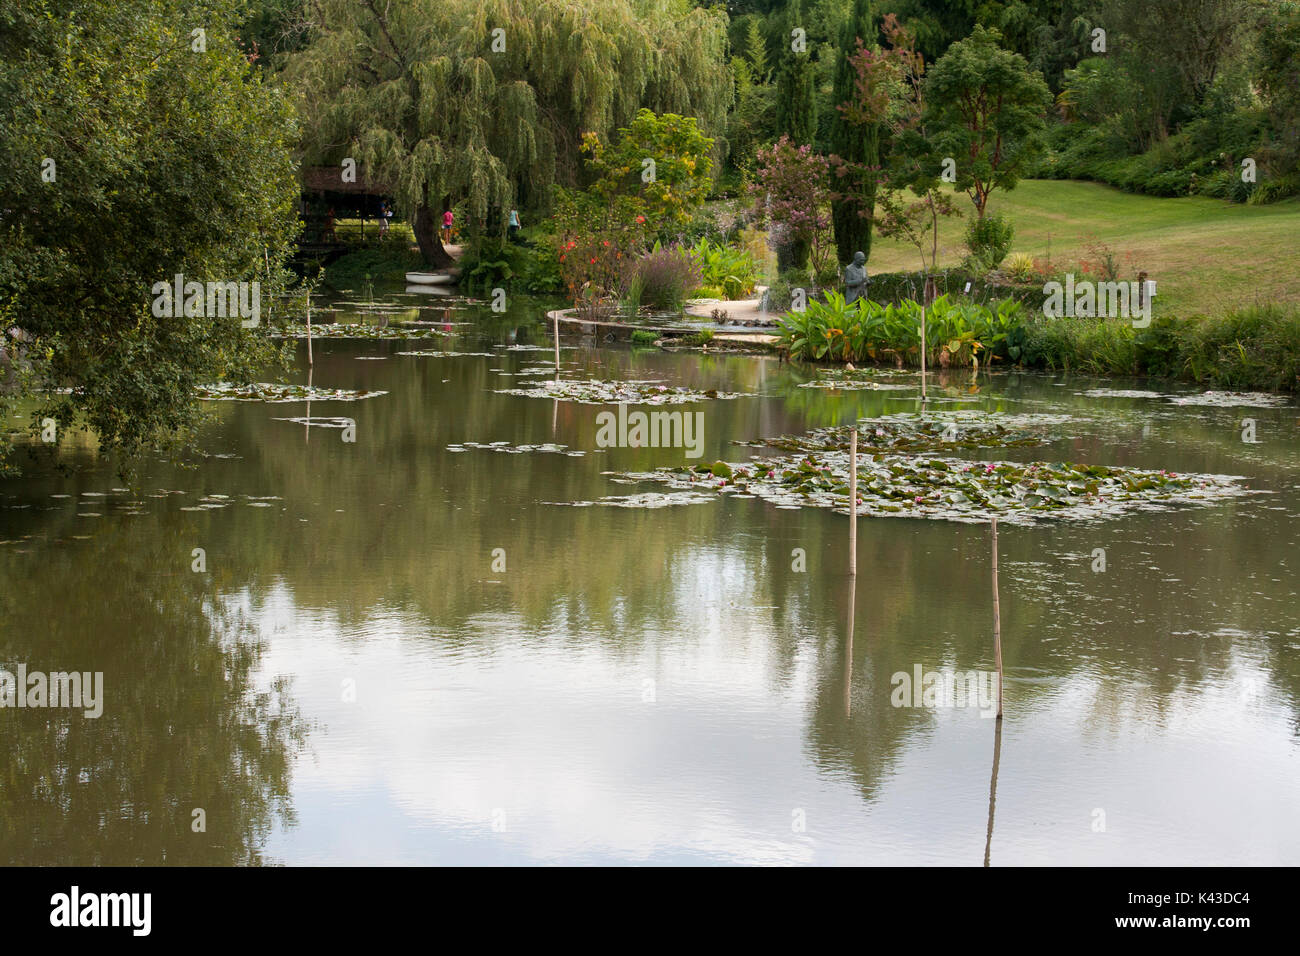 water gardens of Labour-Marliac famous for cultivating Water lilies Stock Photo